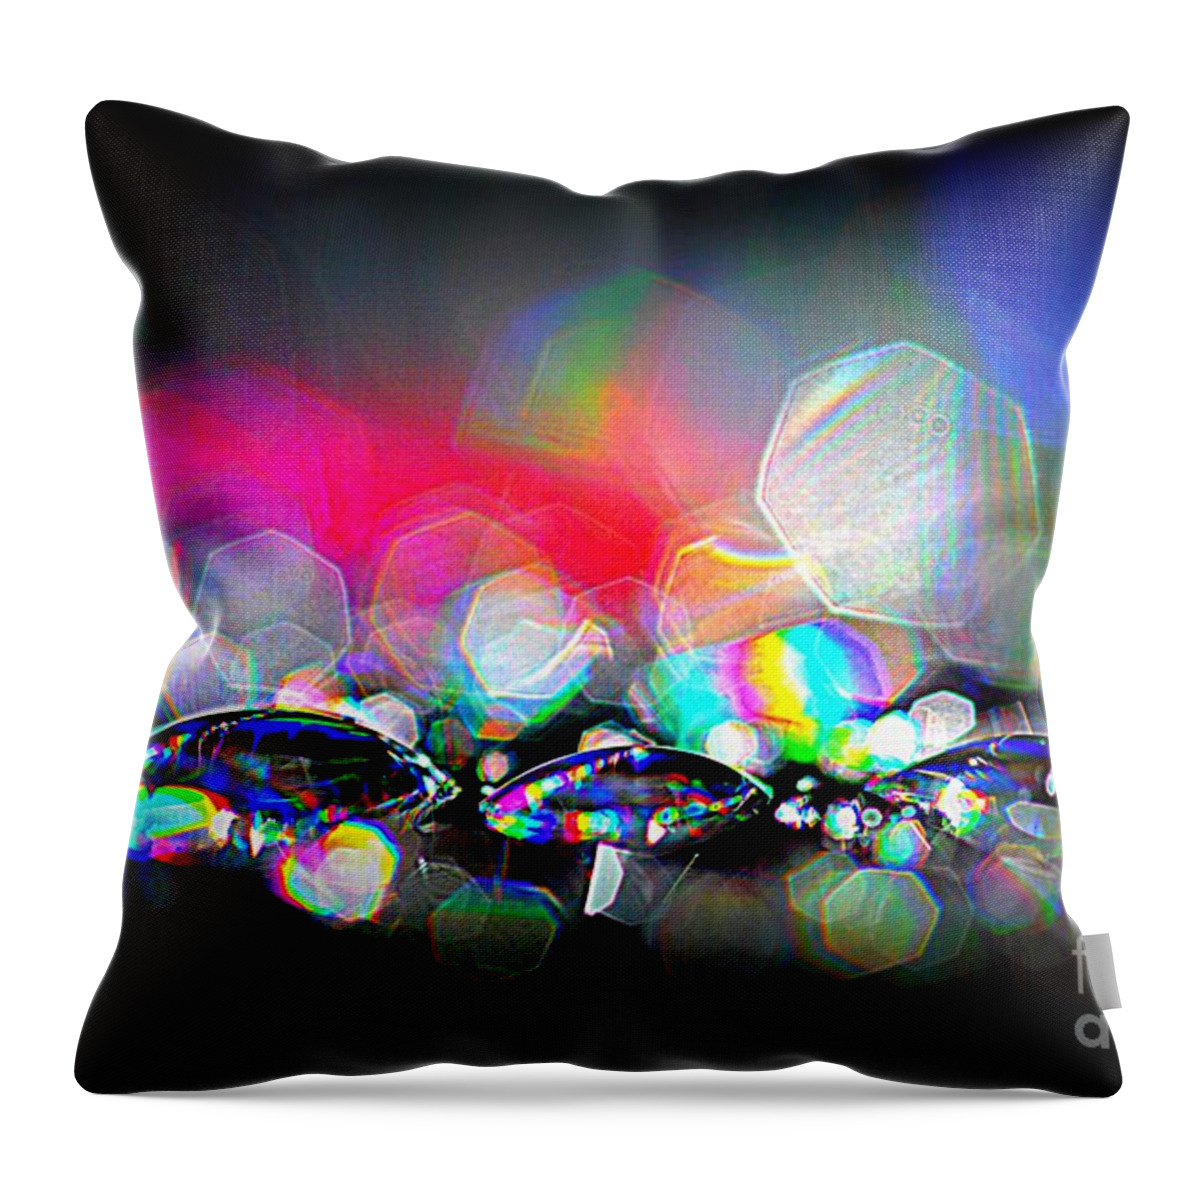 Sparks Throw Pillow featuring the photograph Sparks #4 by Sylvie Leandre